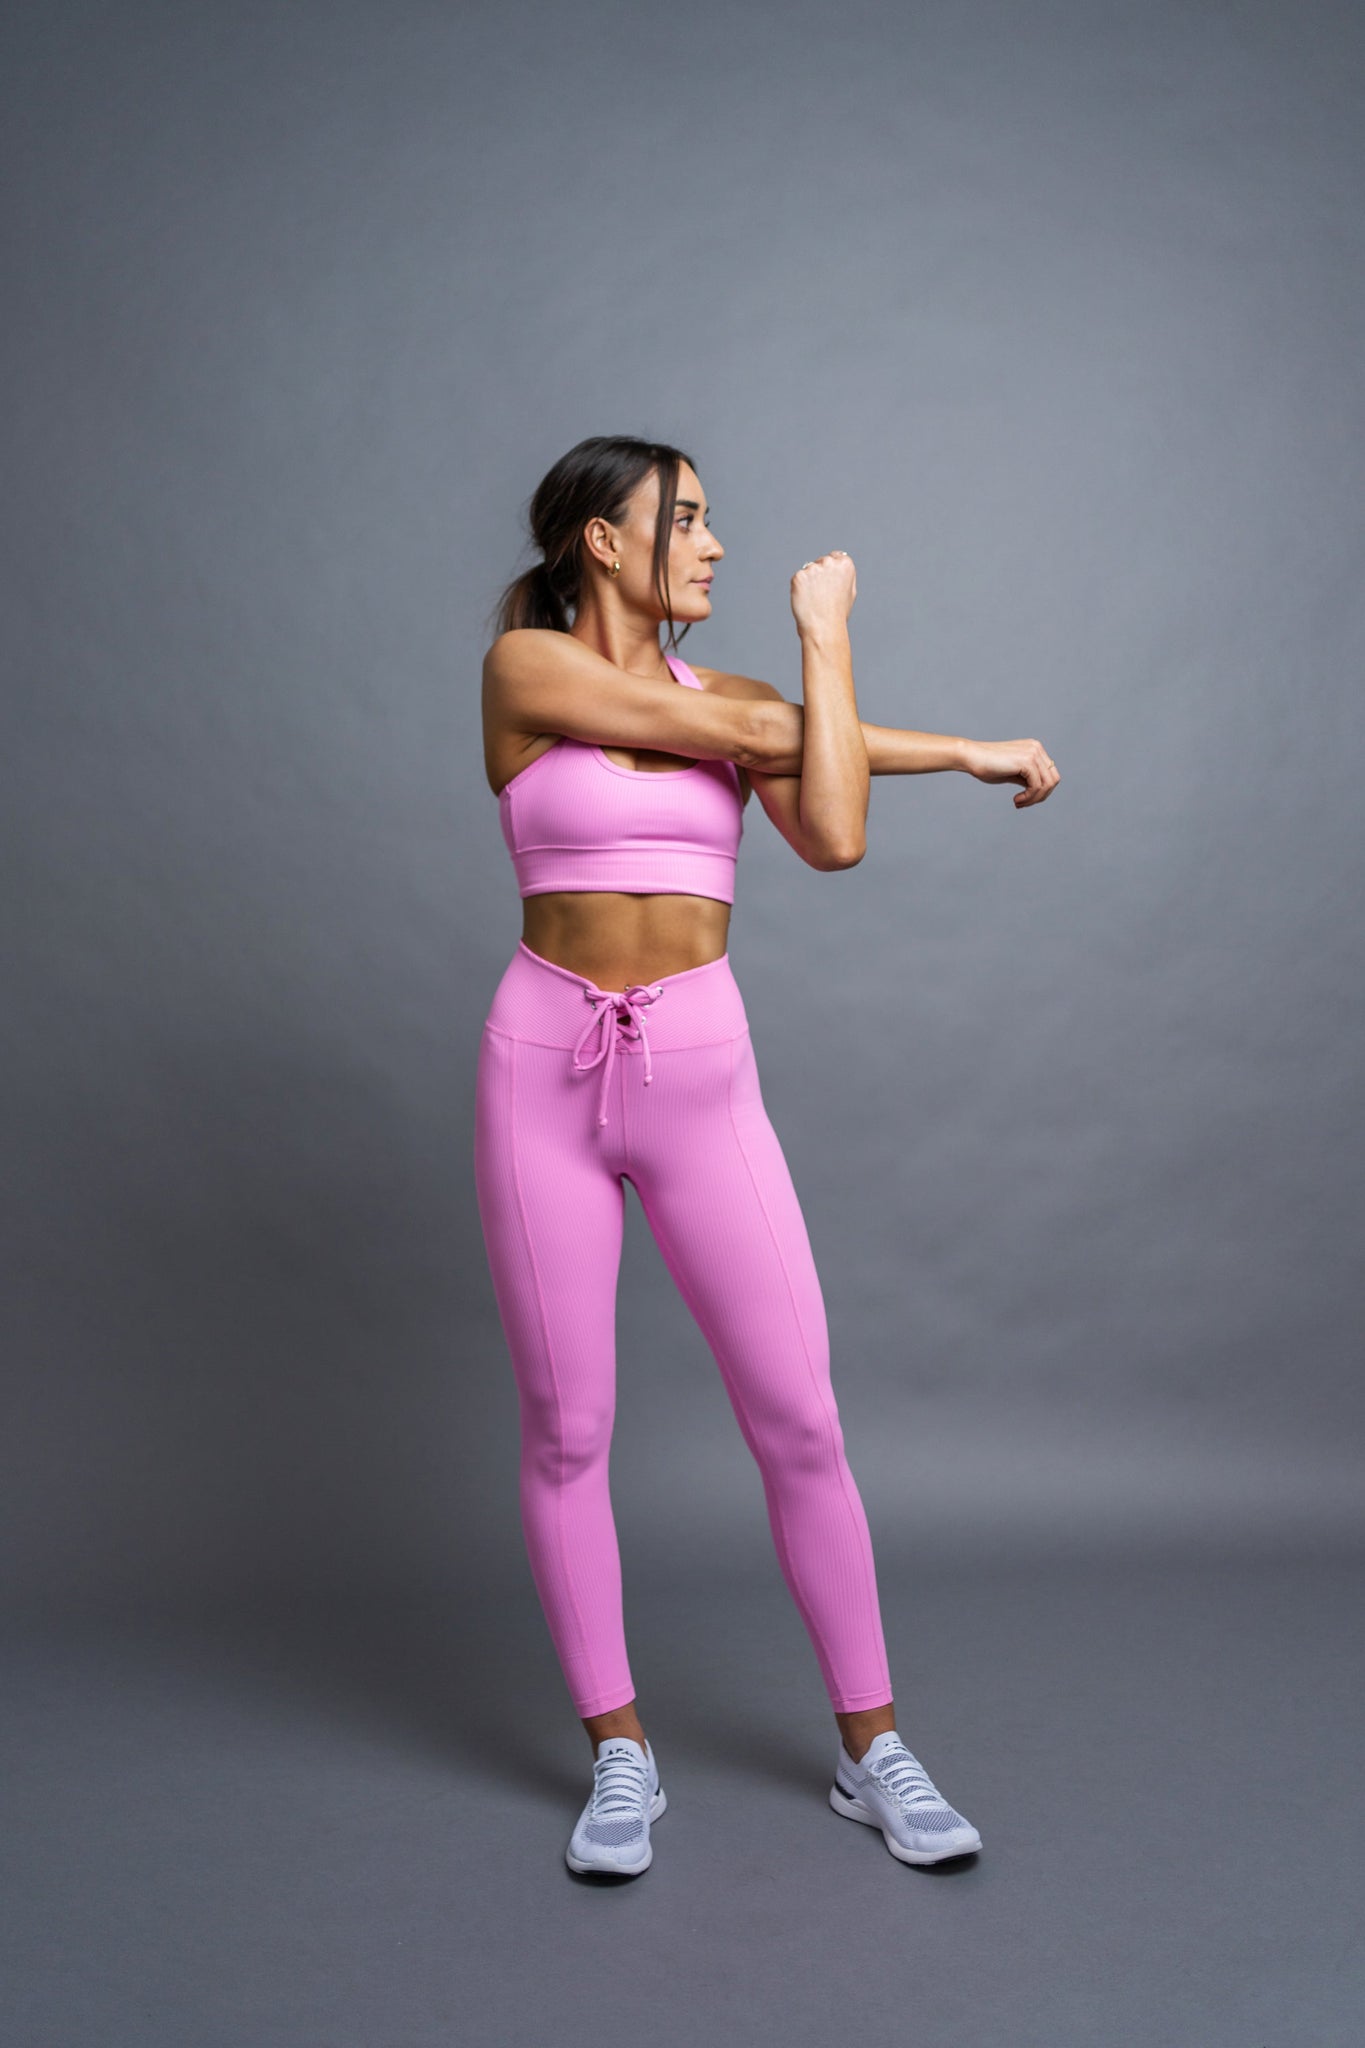 YEAR OF OURS Ribbed Football Legging in Neon Kiwi